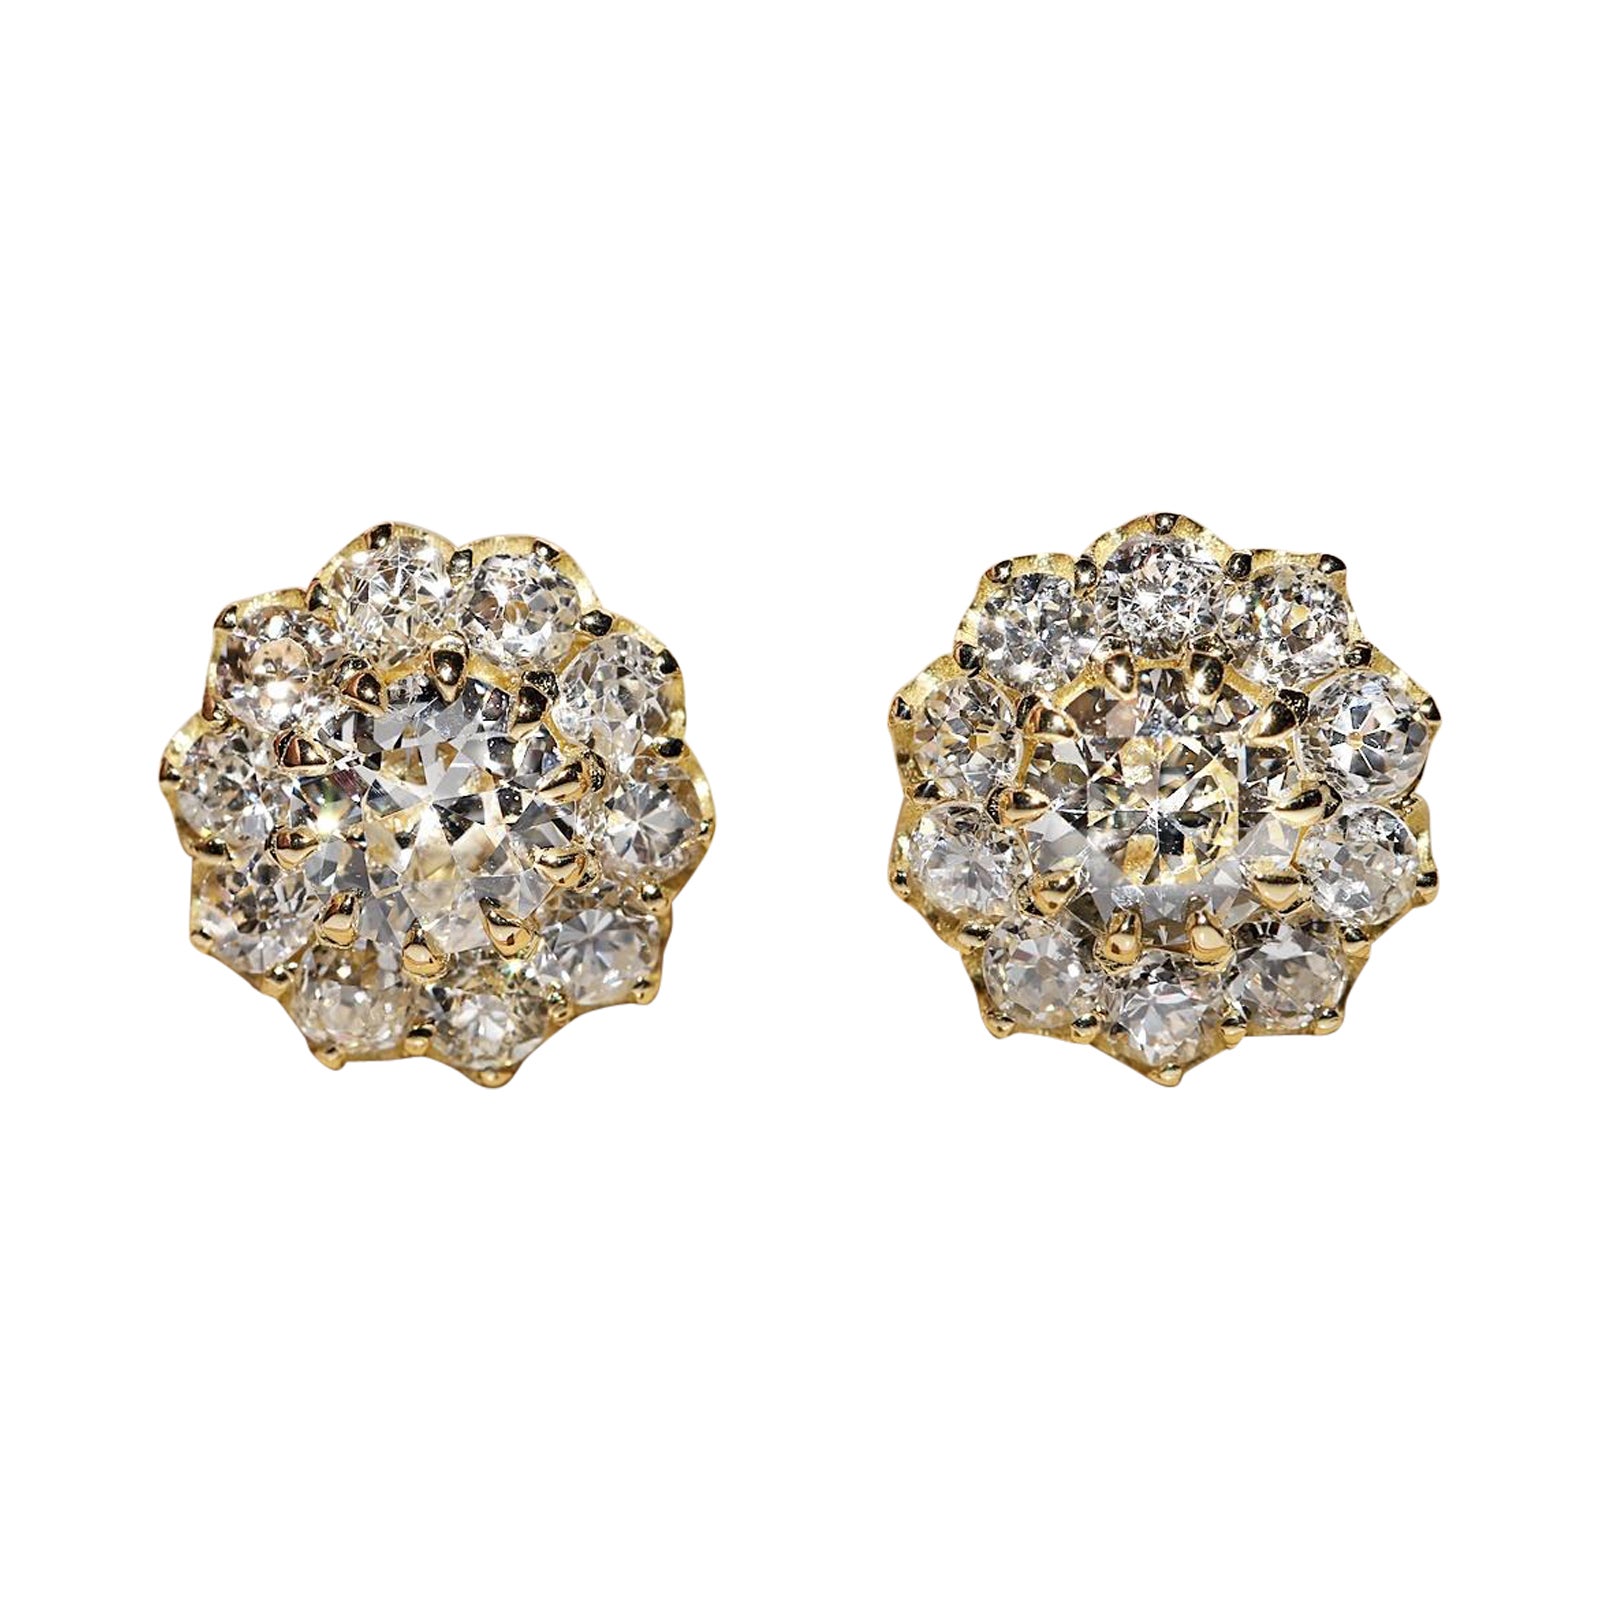 New Made 18k Gold Natural Diamond Decorated Pretty Earring 